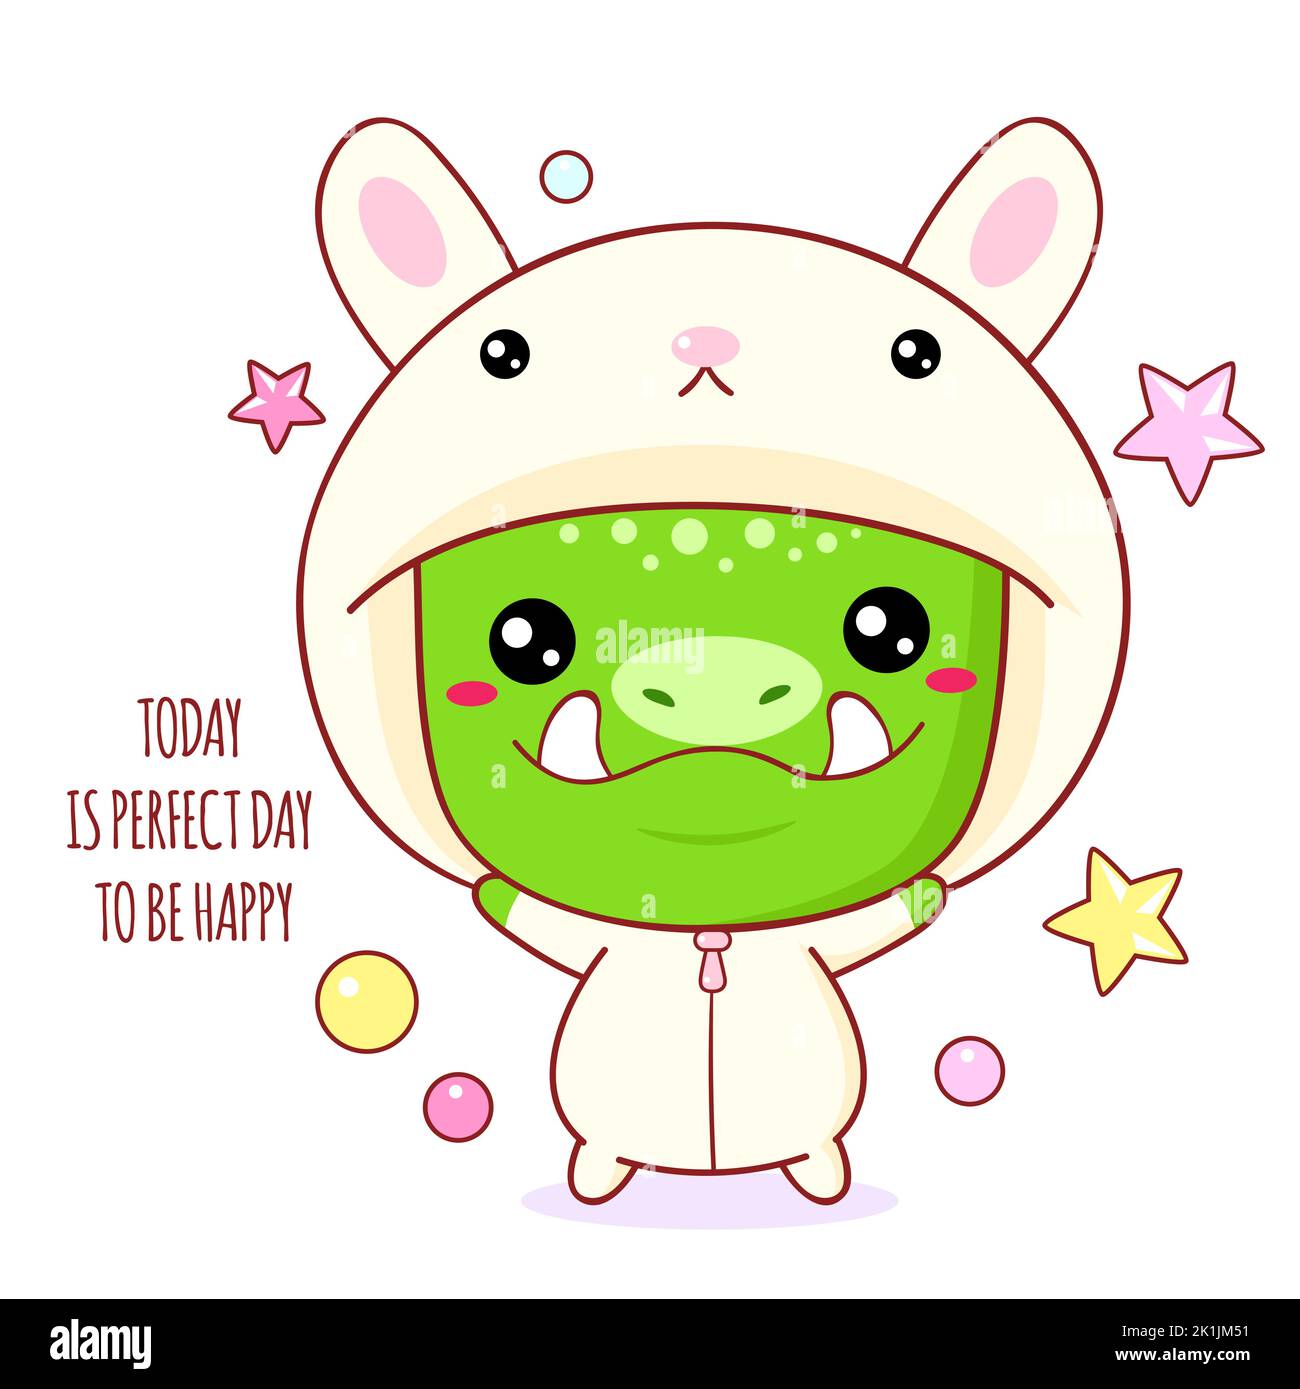 Cute baby monster in bunny costume. Today is perfect day to be happy. Banner with affirmation for kids playroom. Motivational quote for card, invitati Stock Vector